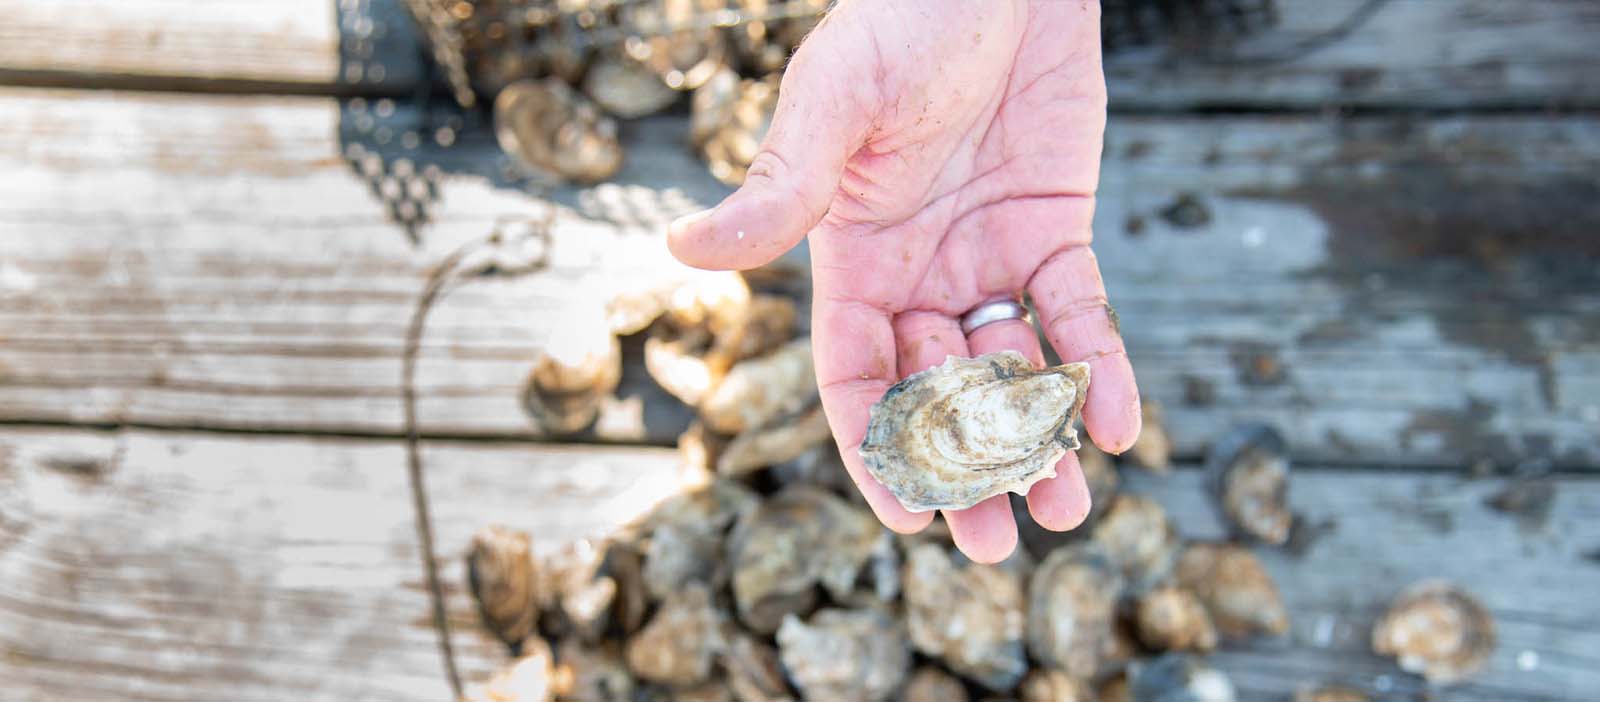 Shellfish Research Lab helps Georgia make strides in oyster aquaculture 